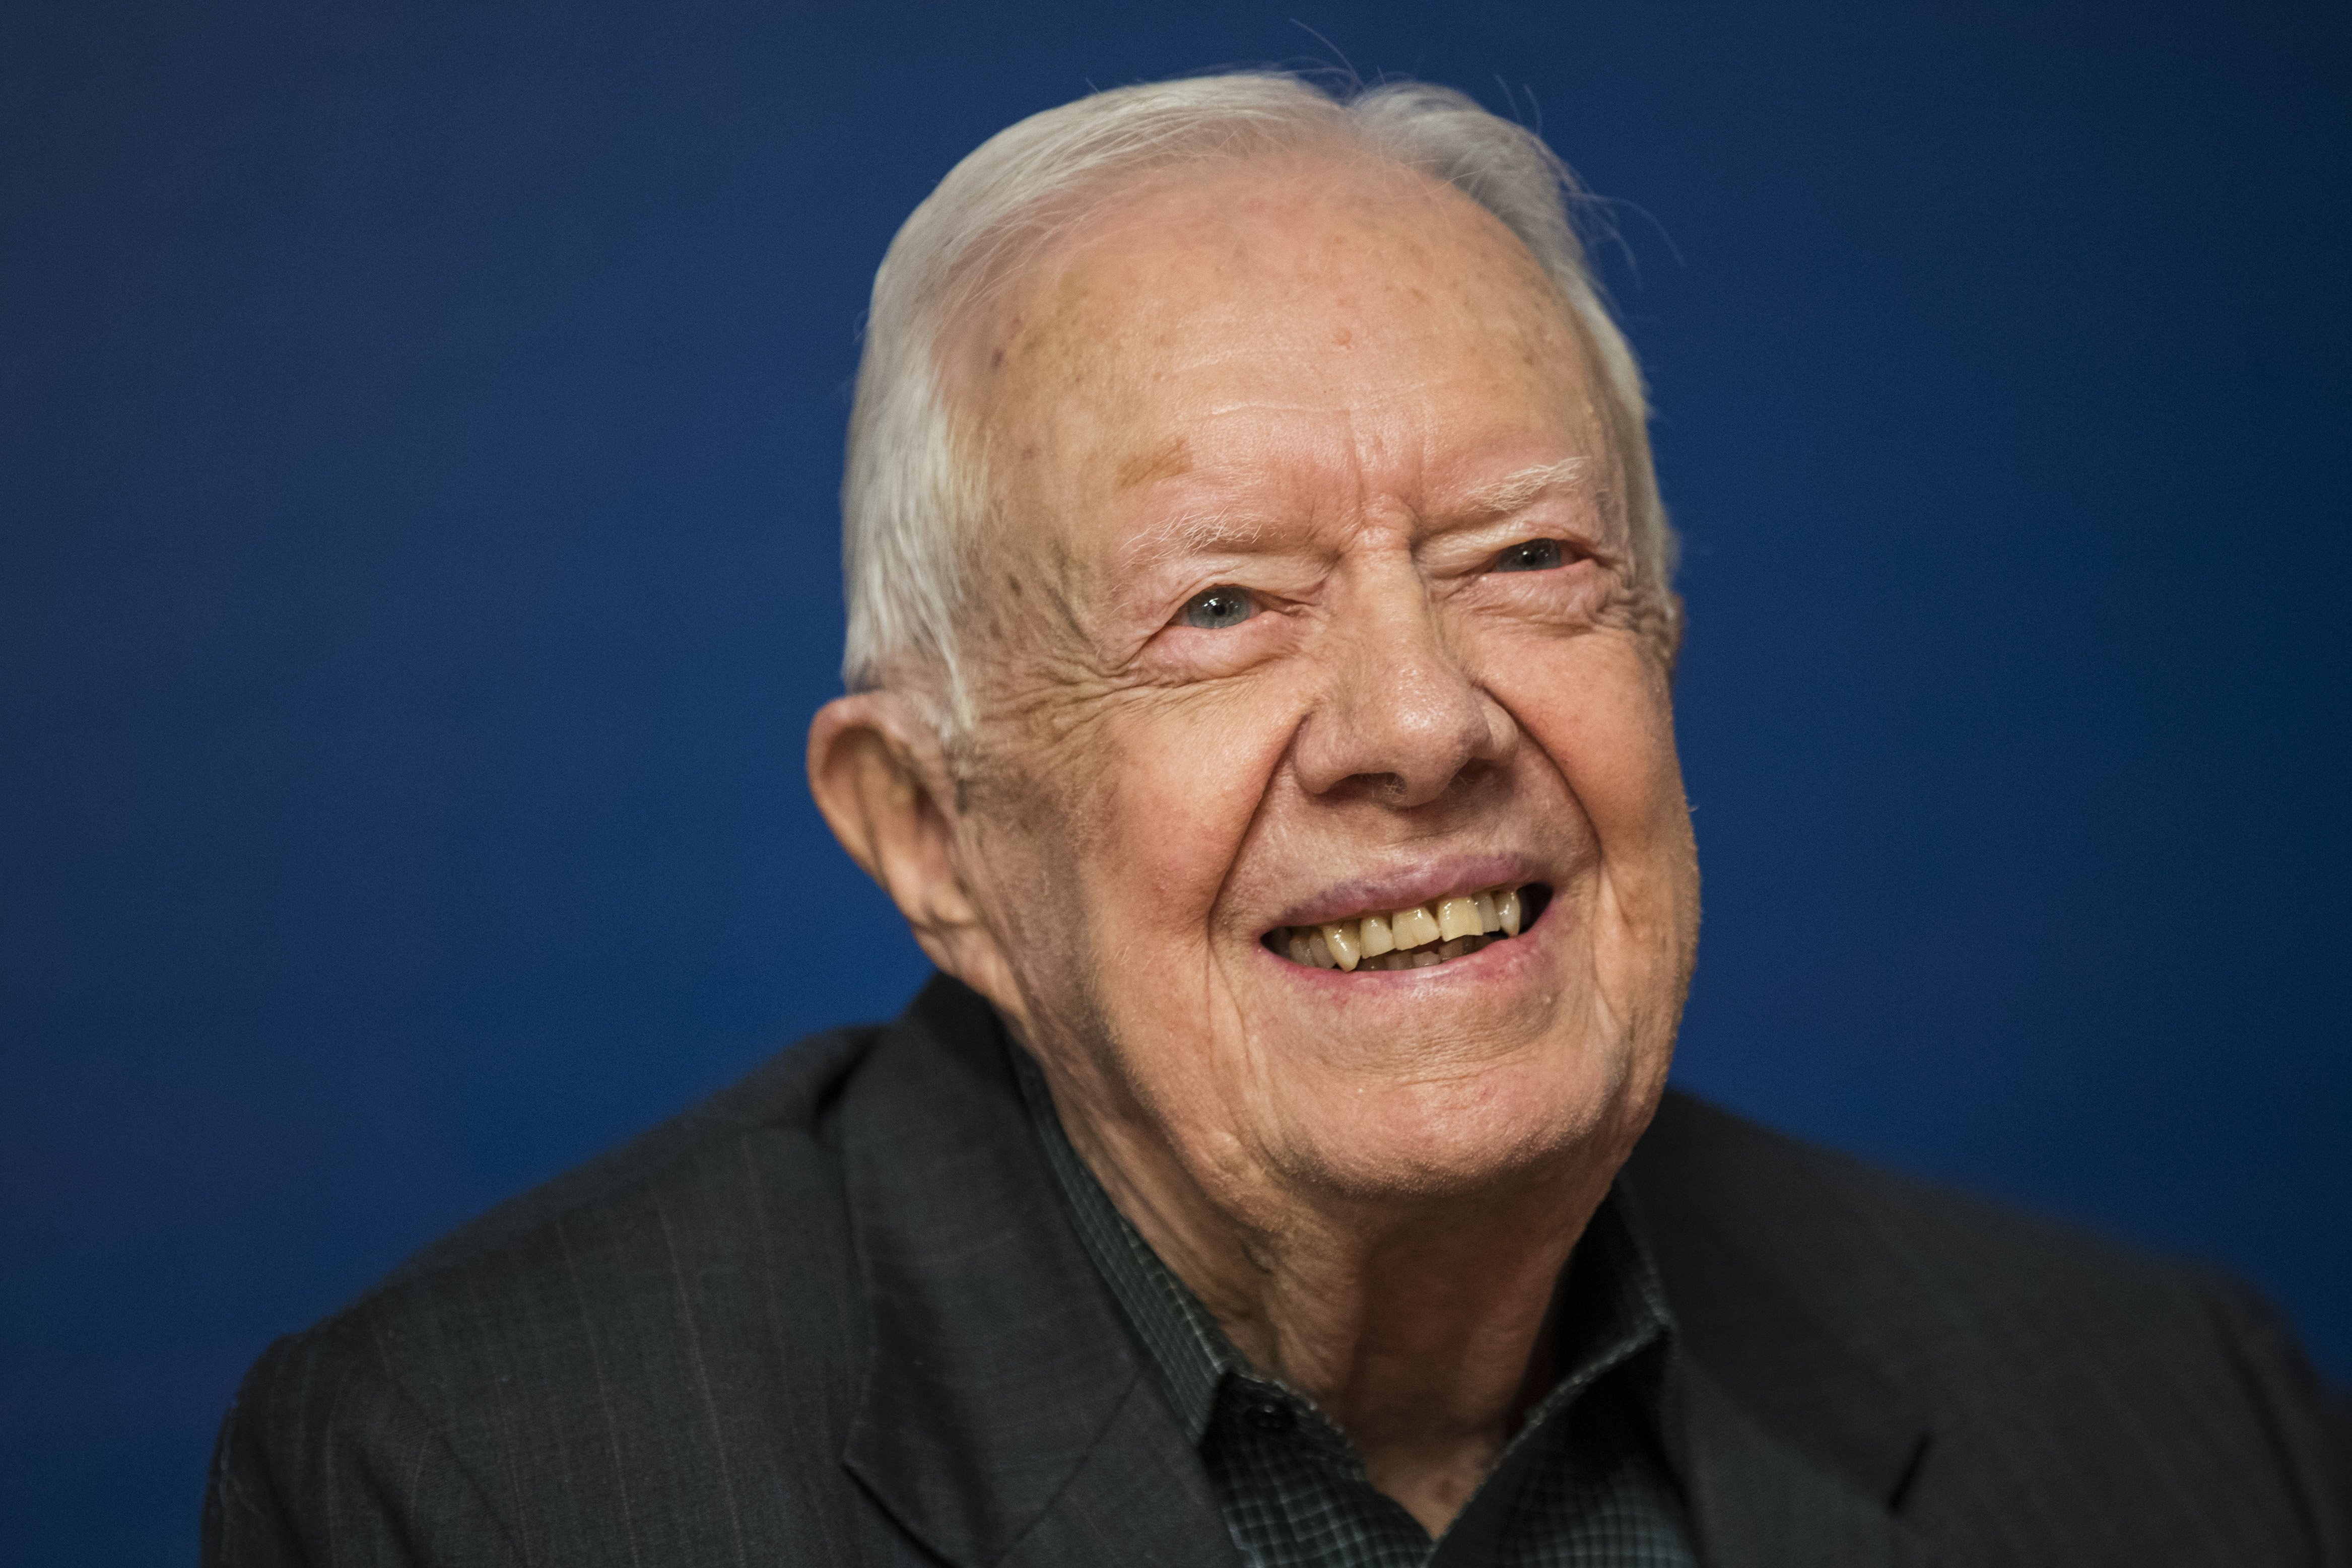  Former U.S. President Jimmy Carter smiles during a book signing event for his new book 'Faith: A Journey For All' at Barnes & Noble bookstore in Midtown Manhattan, March 26, 2018, in New York City. | Source: Getty Images.